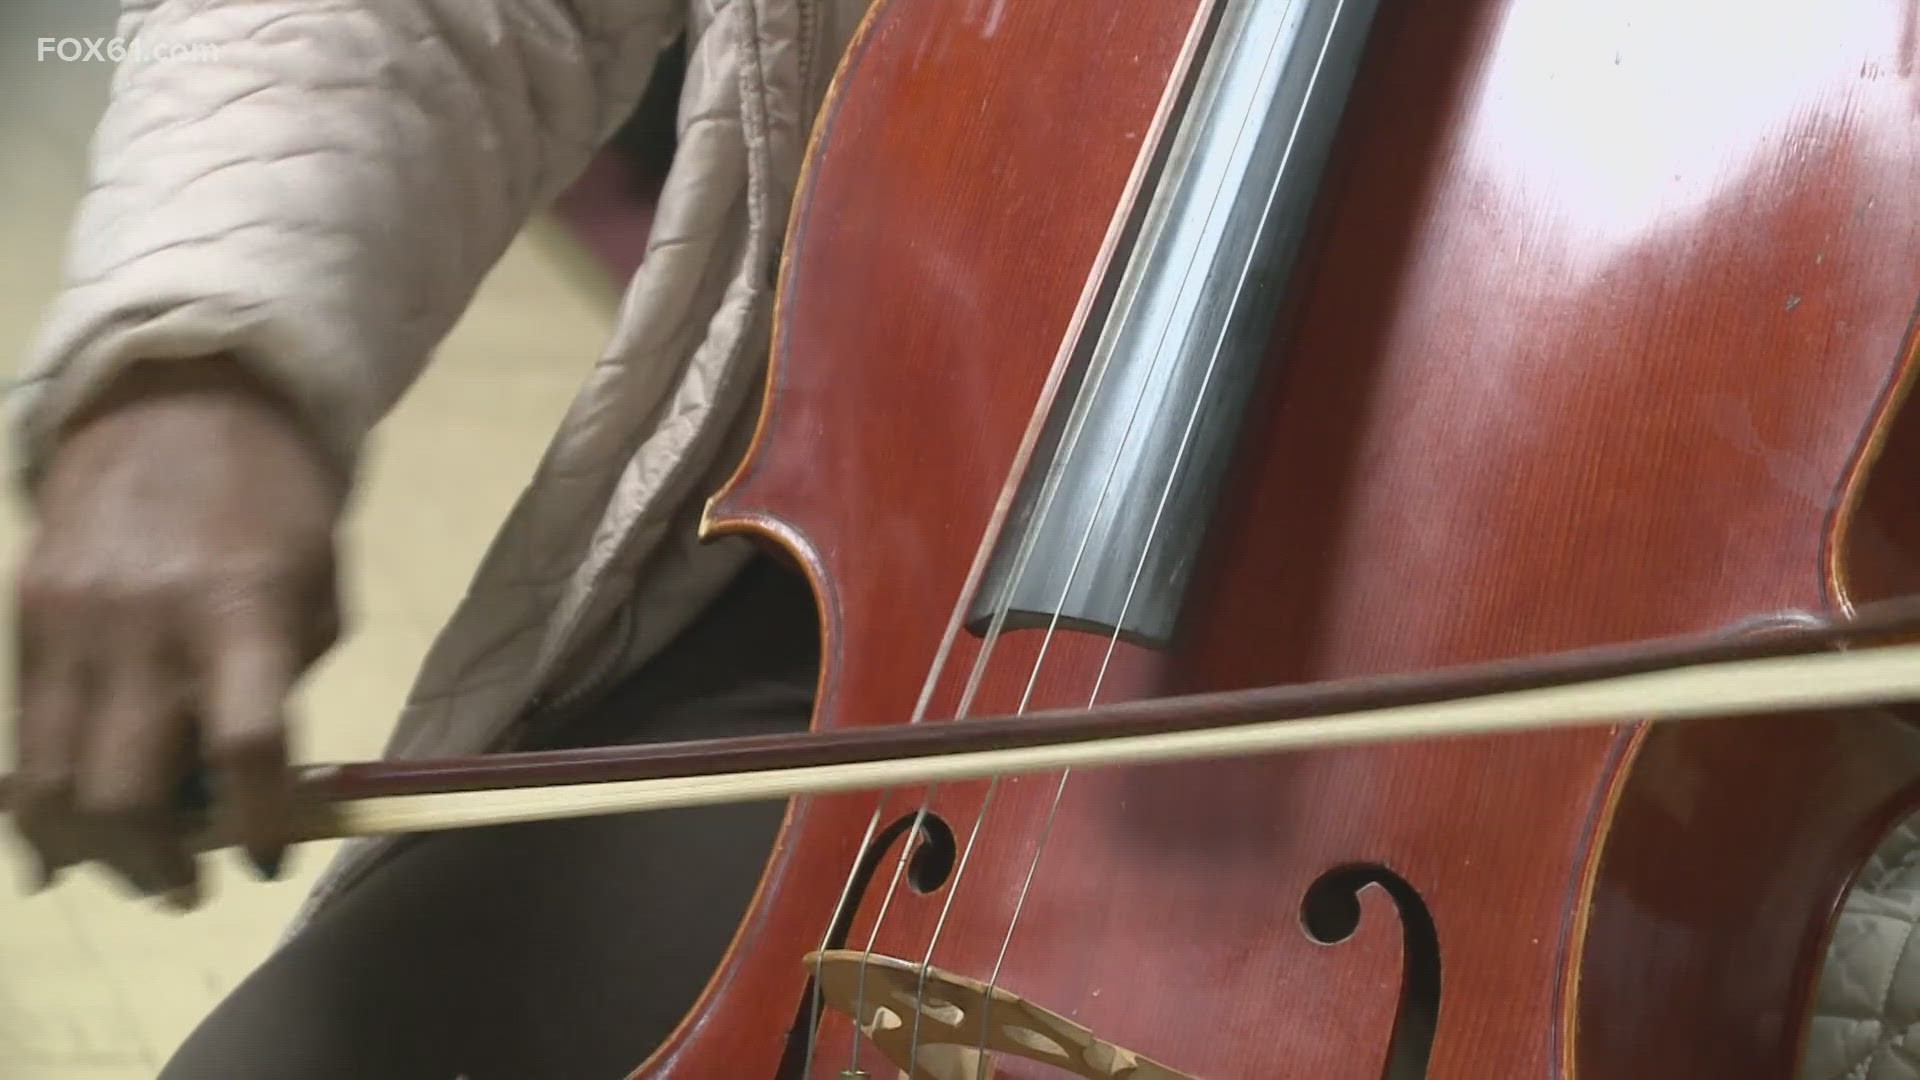 After years of searching, New York musician Normearleasa Thomas was reunited with her cello after it was stolen; a reunion made possible thanks to Spino's Pawn Shop.